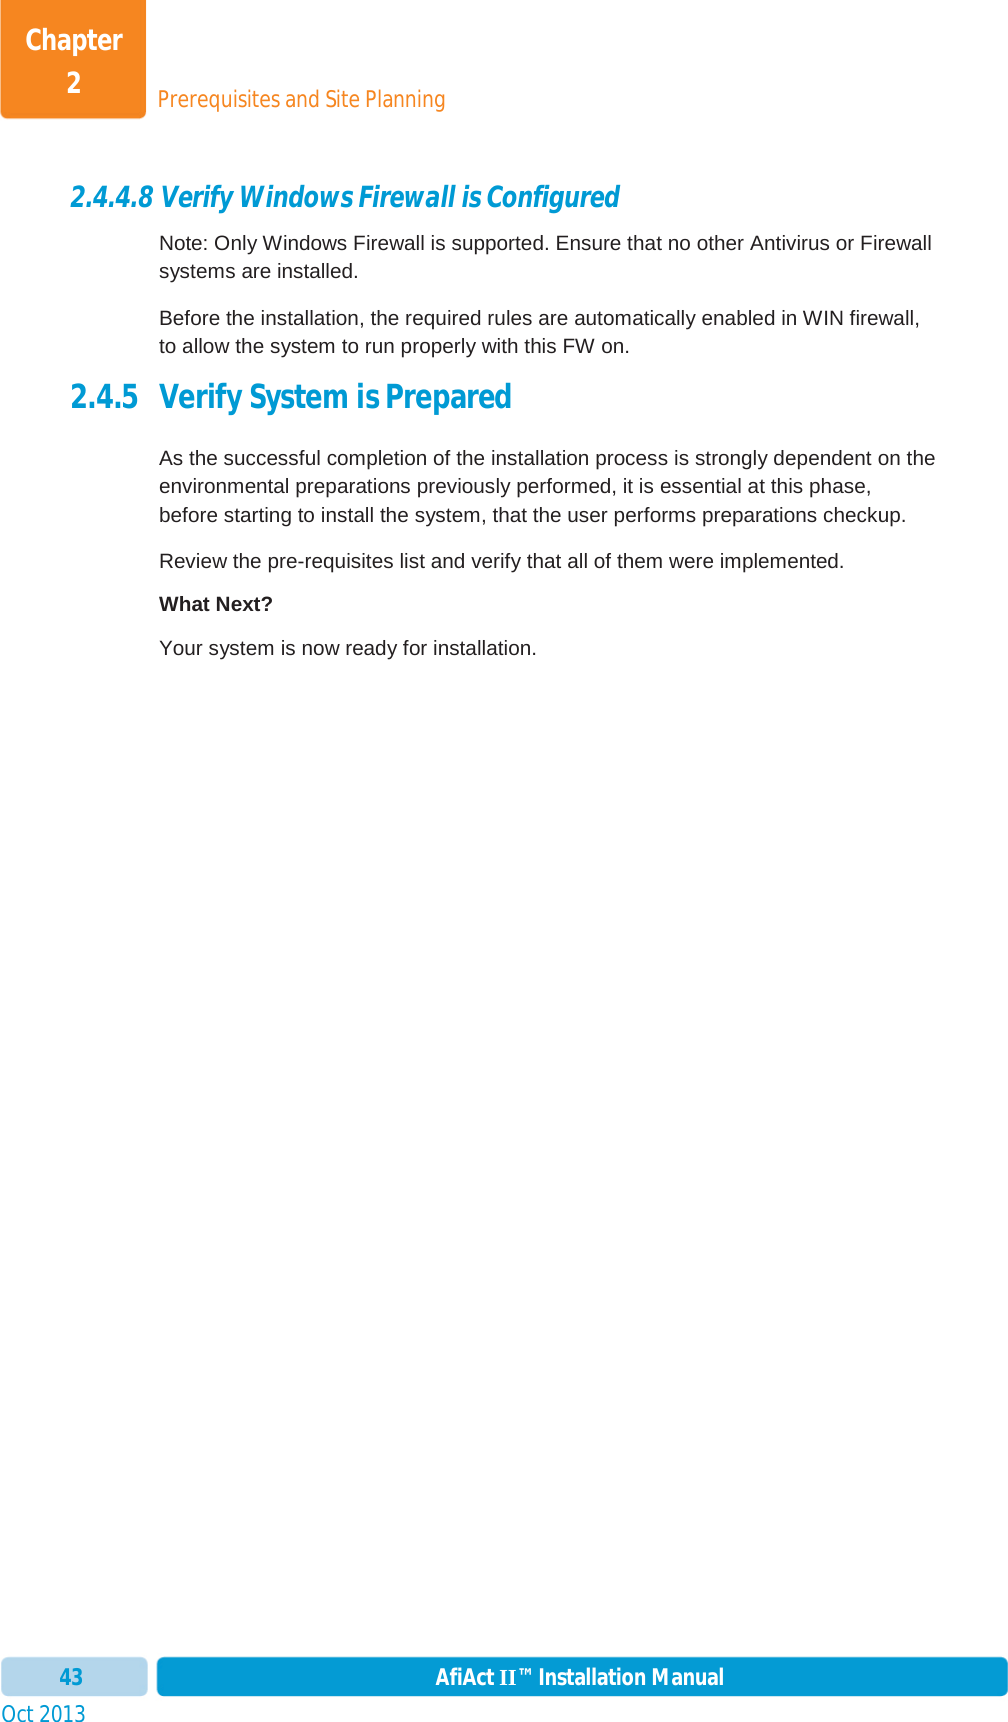 Prerequisites and Site PlanningChapter 2Oct 2013 AfiAct II™ Installation Manual432.4.4.8 Verify Windows Firewall is Configured Note: Only Windows Firewall is supported. Ensure that no other Antivirus or Firewall systems are installed. Before the installation, the required rules are automatically enabled in WIN firewall, to allow the system to run properly with this FW on. 2.4.5 Verify System is Prepared As the successful completion of the installation process is strongly dependent on the environmental preparations previously performed, it is essential at this phase, before starting to install the system, that the user performs preparations checkup. Review the pre-requisites list and verify that all of them were implemented. What Next? Your system is now ready for installation.  